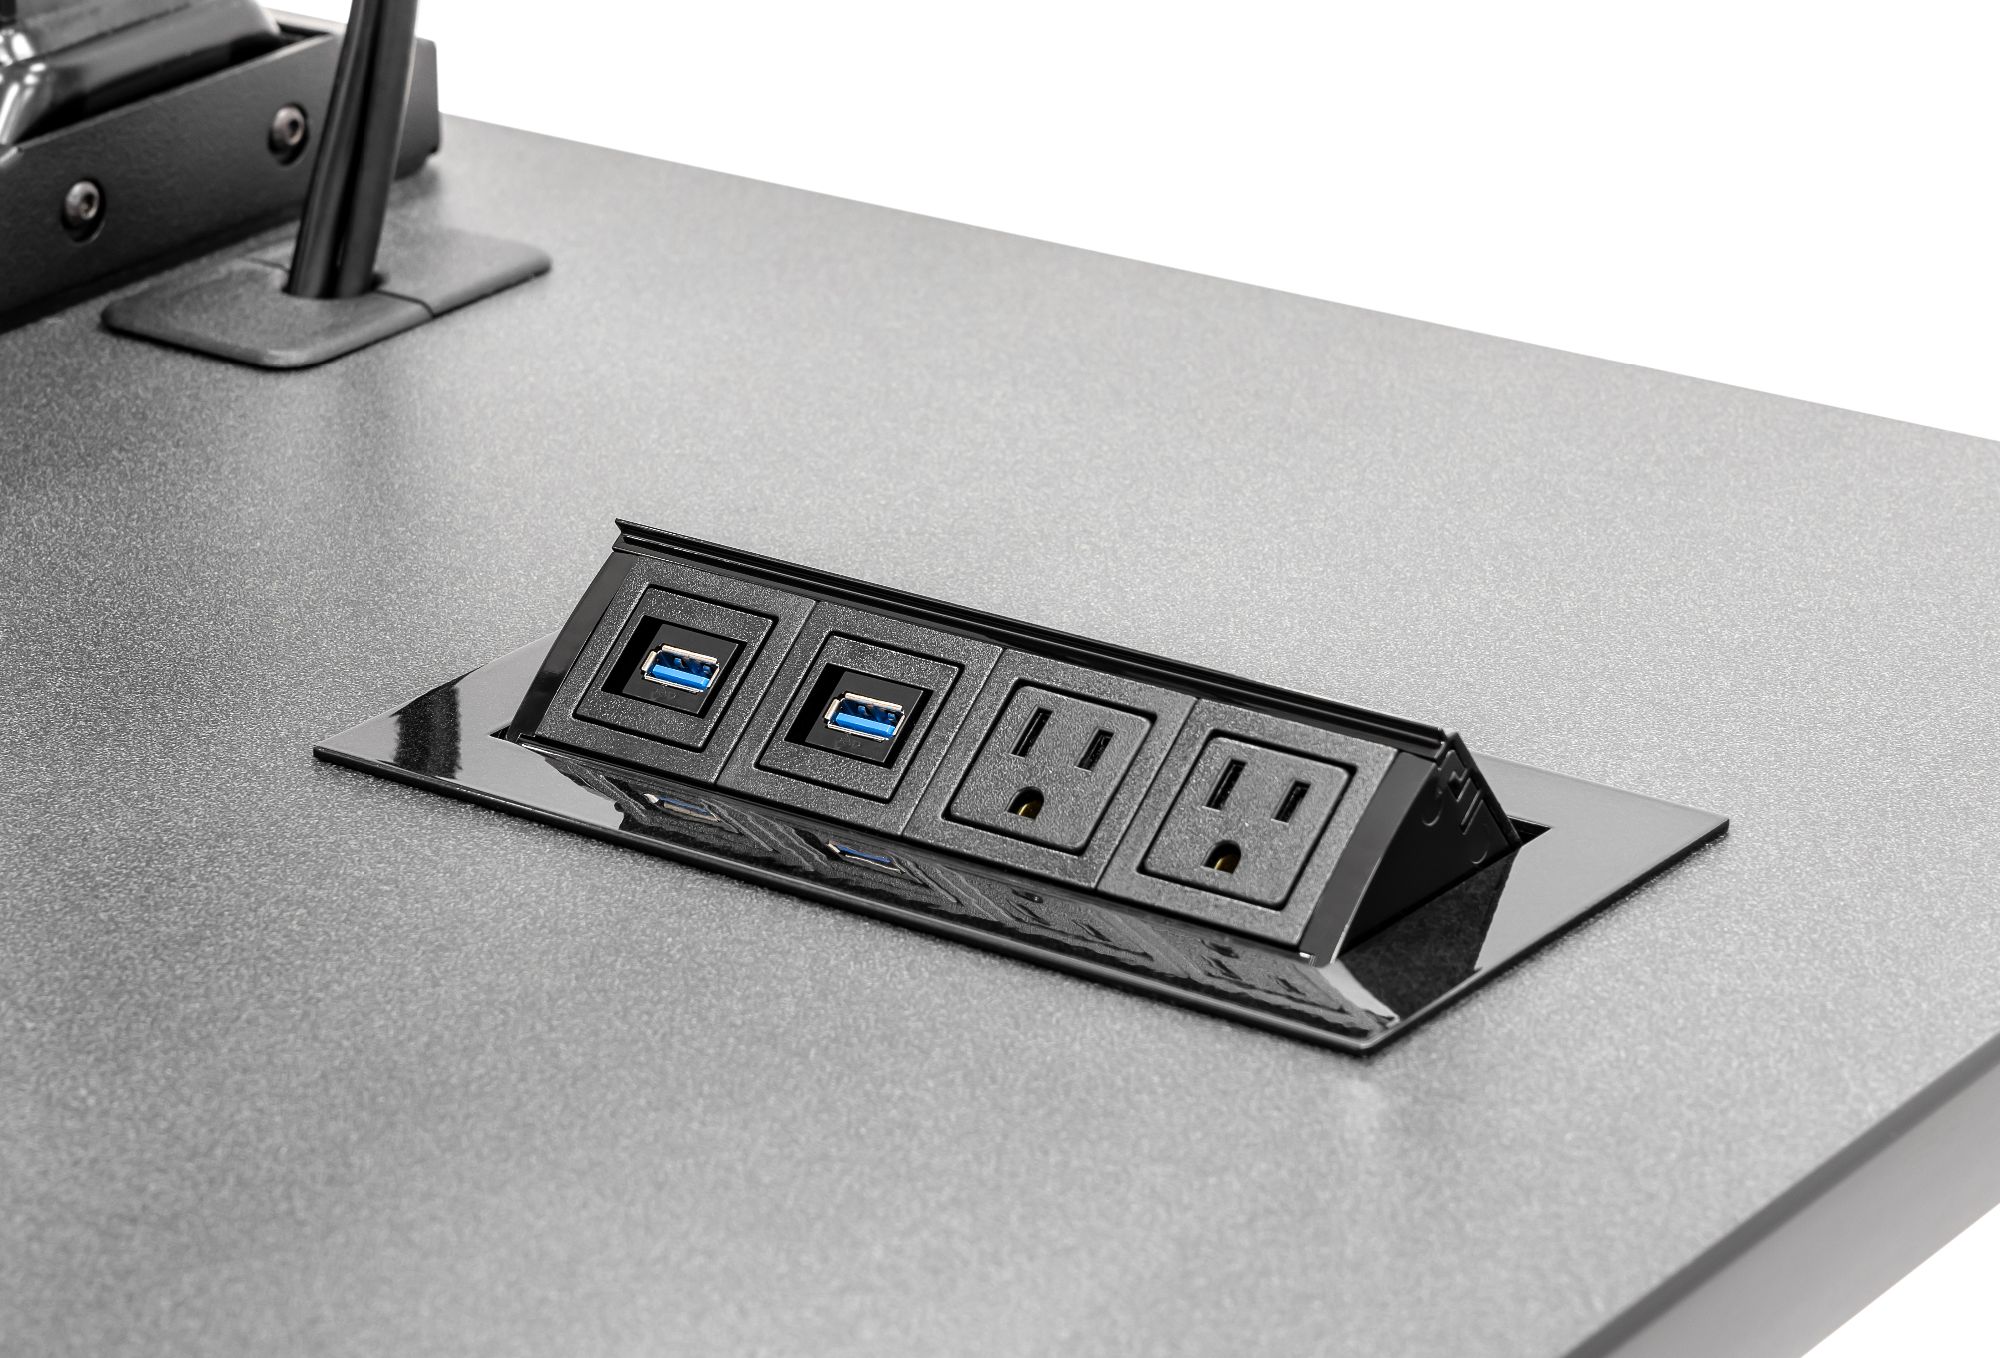 desk with two USB ports on it